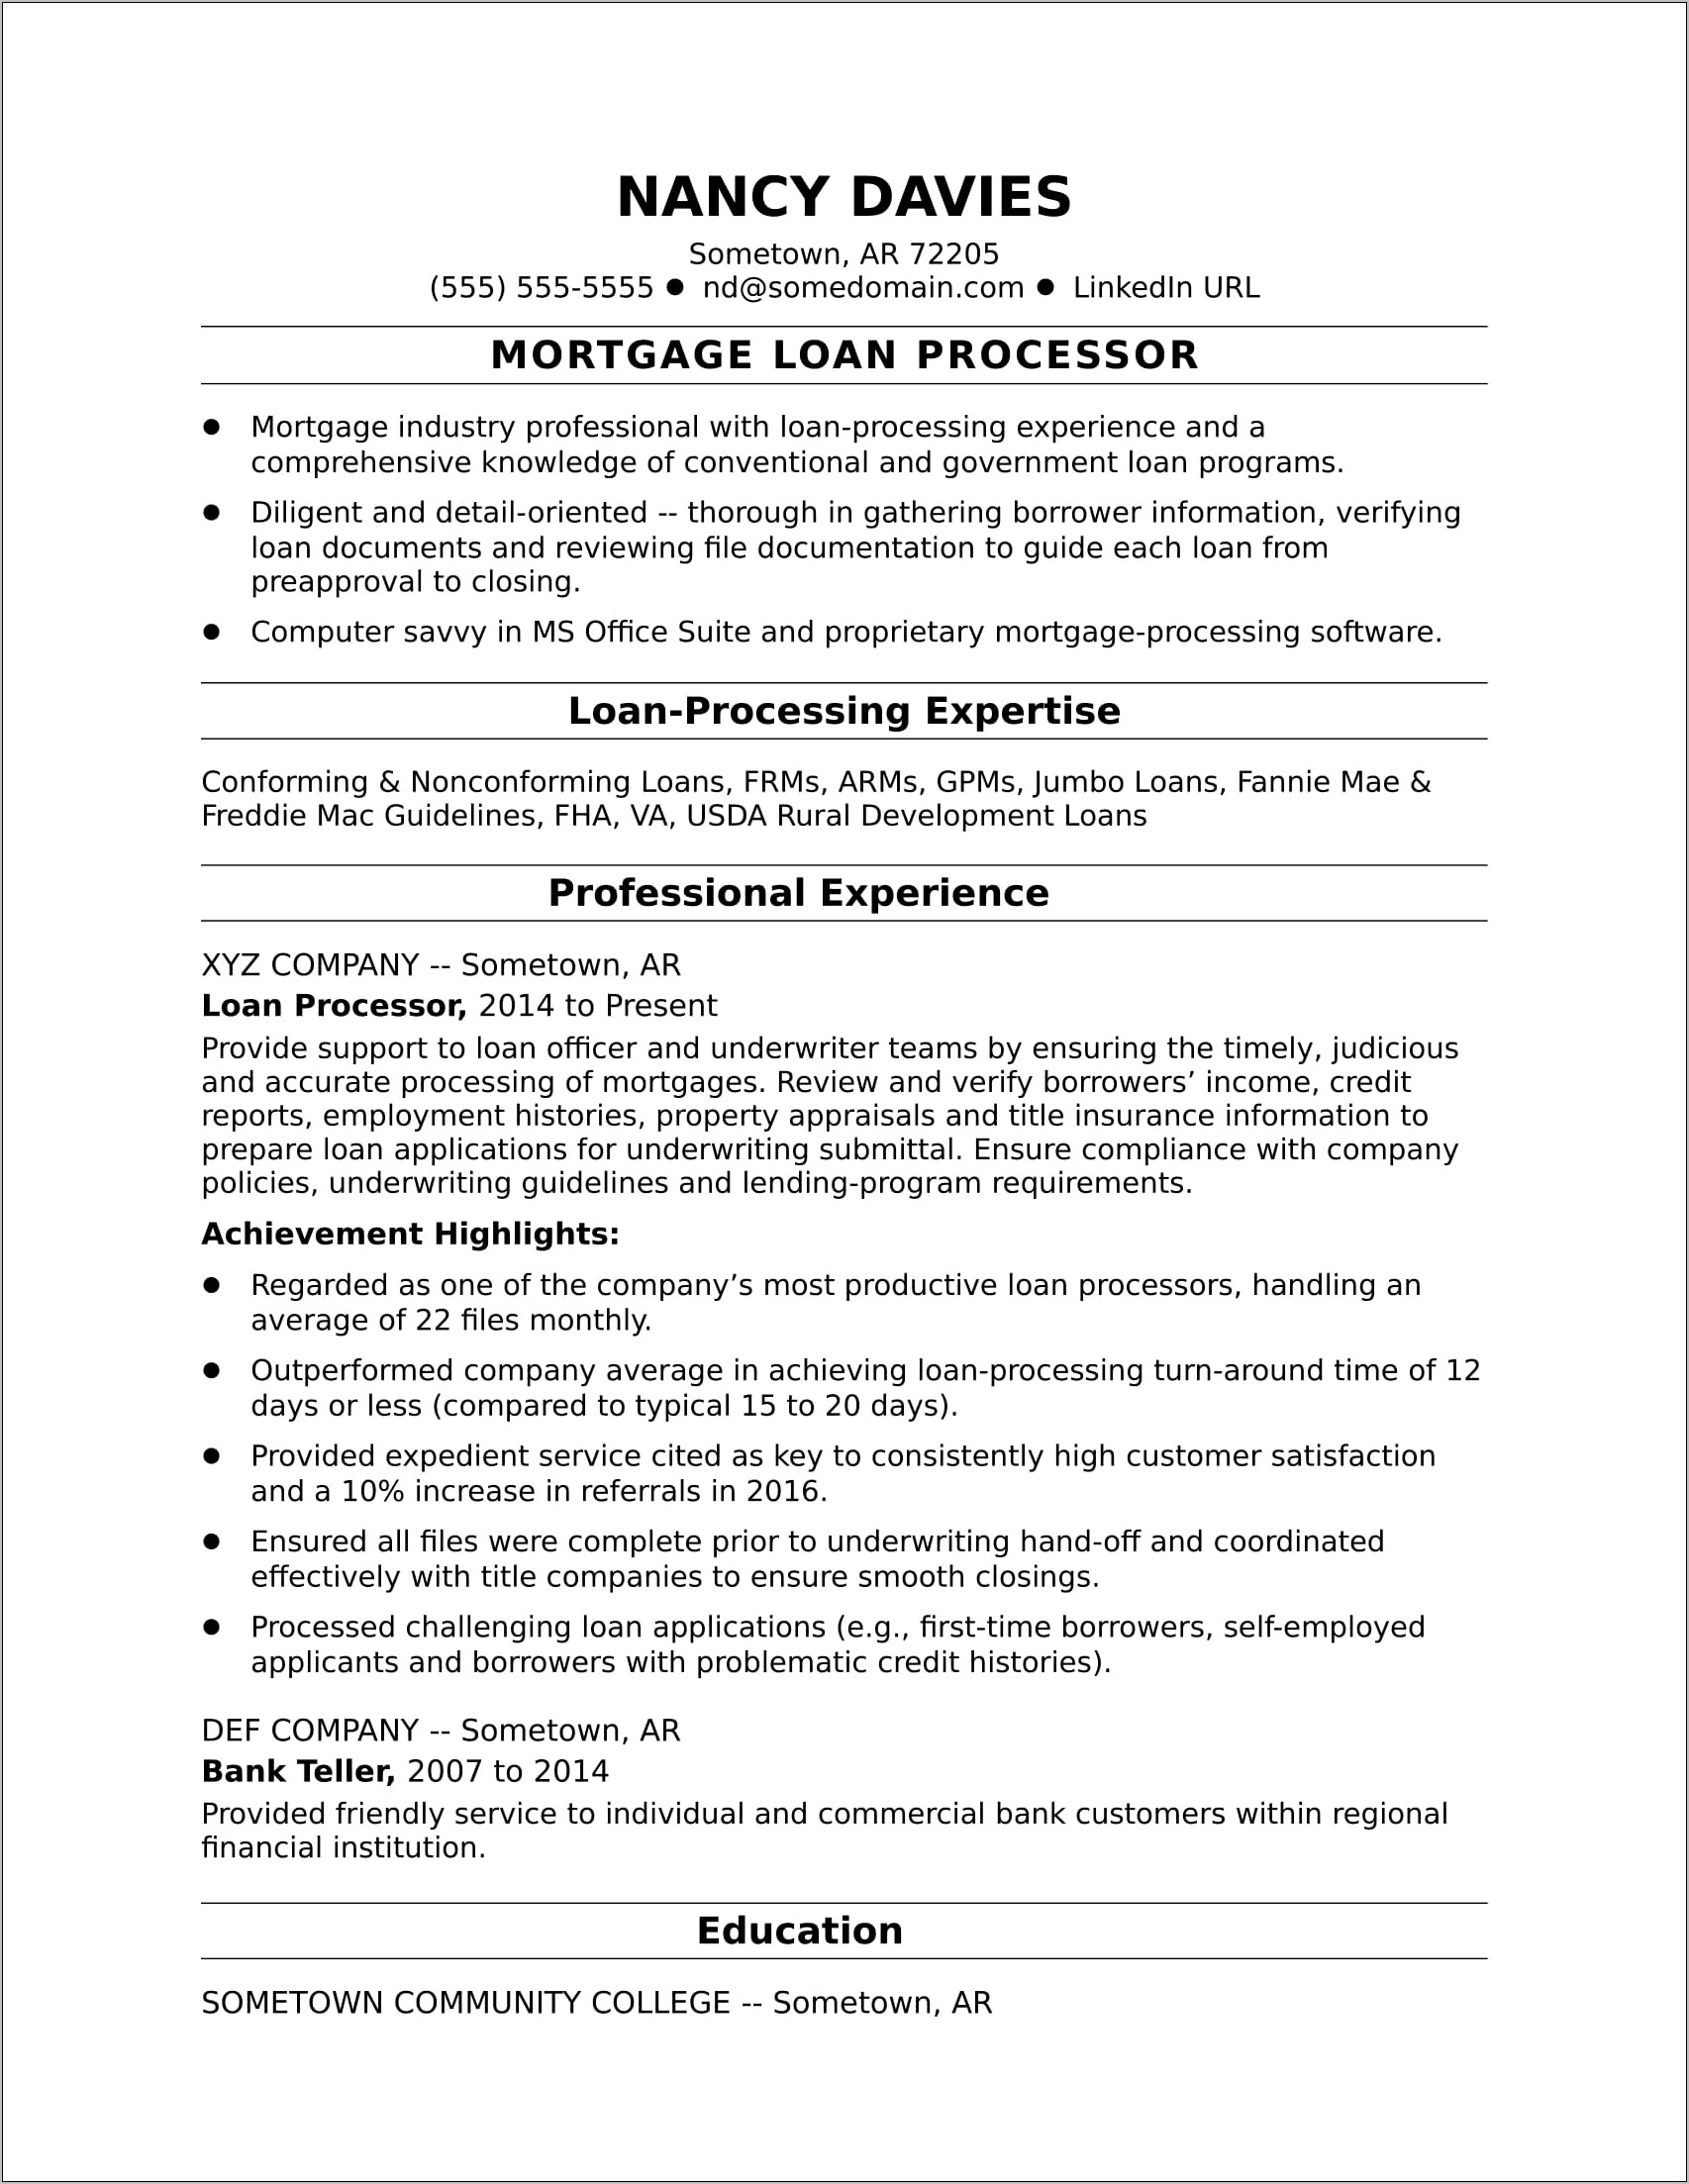 Resume Objective For Credit Union